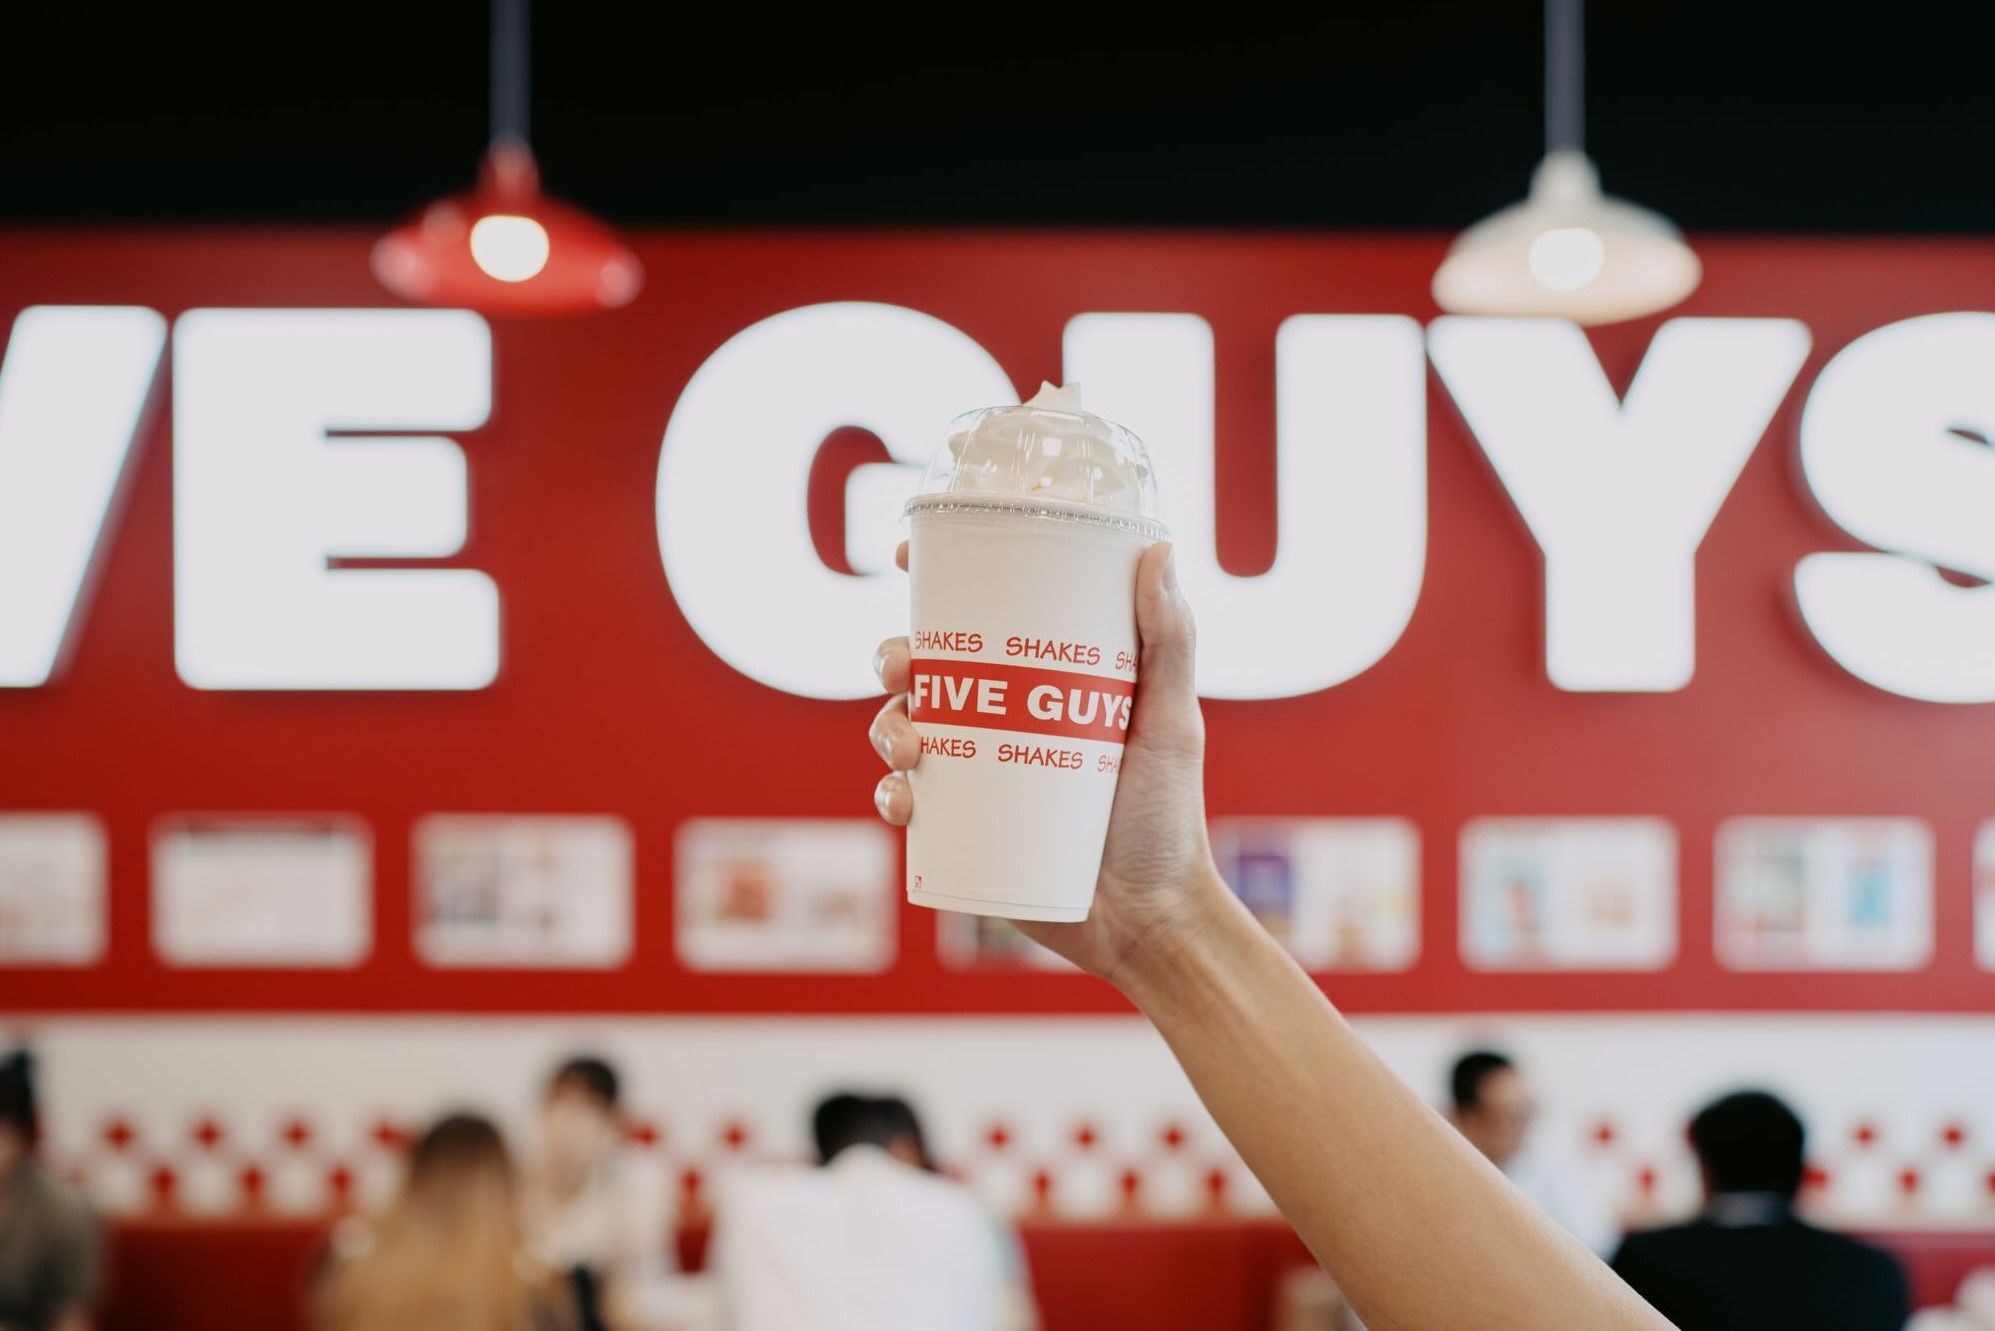 Five Guys brand set to open second Aussie outlet mid-2022